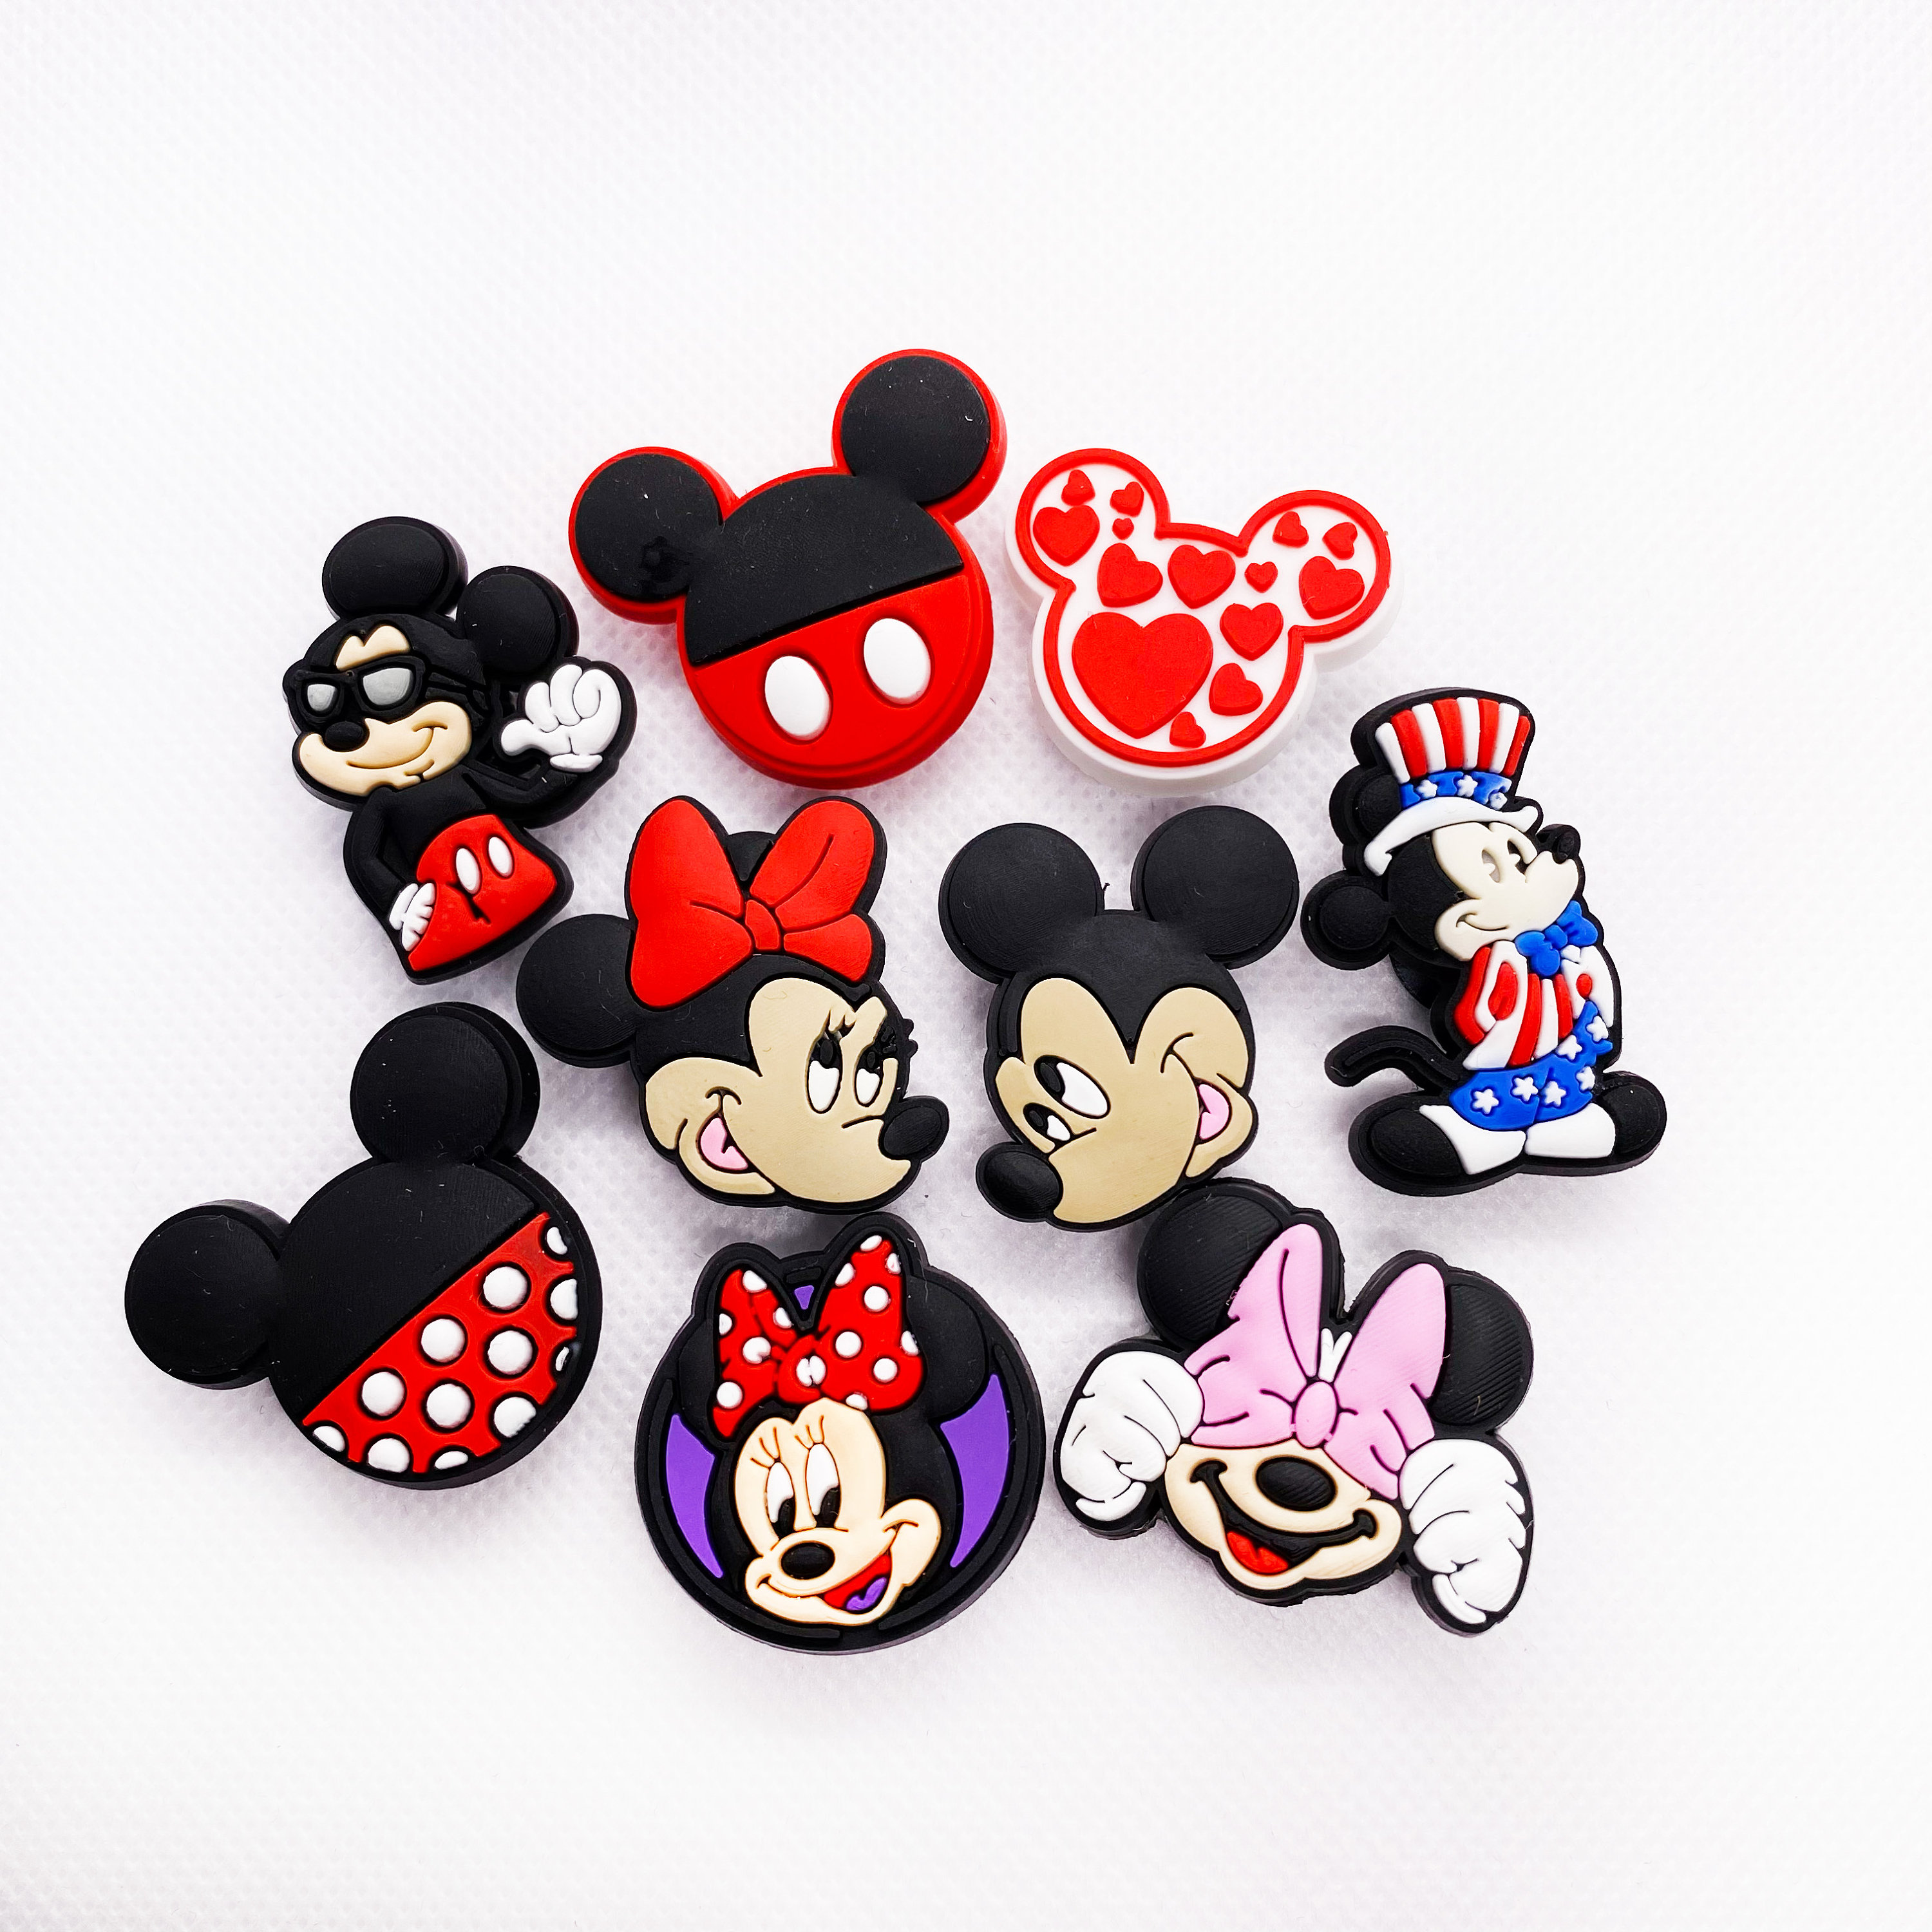 Mickey Mouse Disney Croc Charms Jibbitz Set for Clogs Shoe Accessories  Trending Mickey Mouse Charms for Clogs Fashionable Jibbitz 